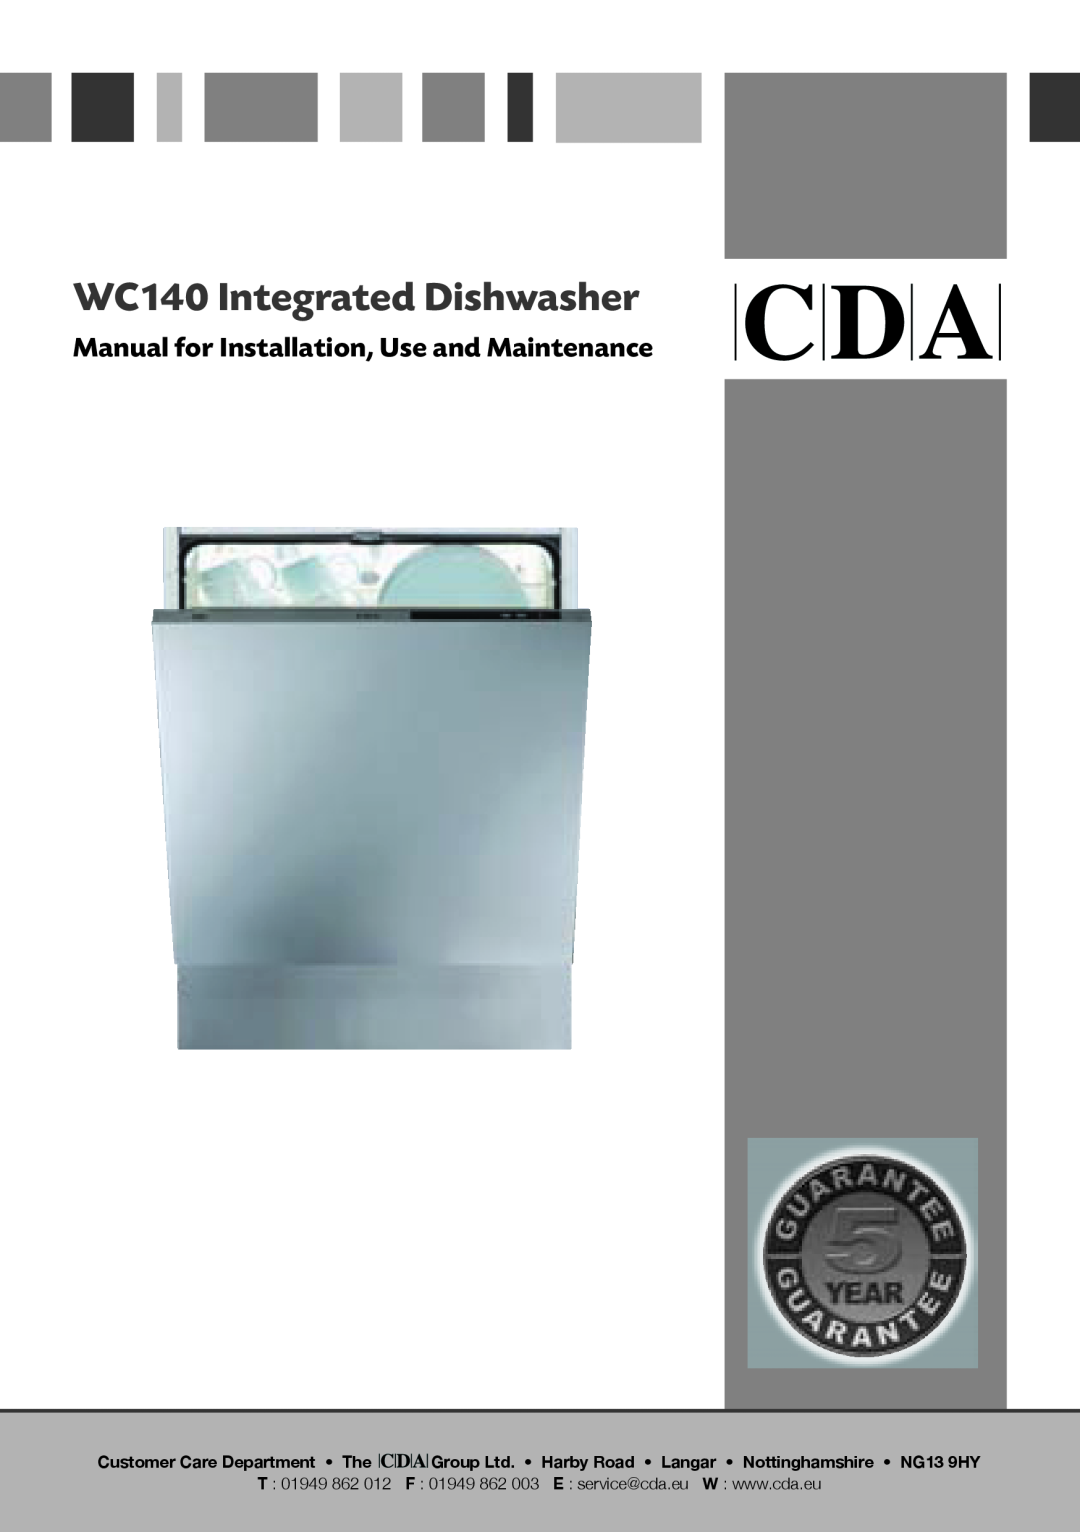 Bosch Appliances manual WC140 Integrated Dishwasher, Manual for Installation, Use and Maintenance, T 01949 